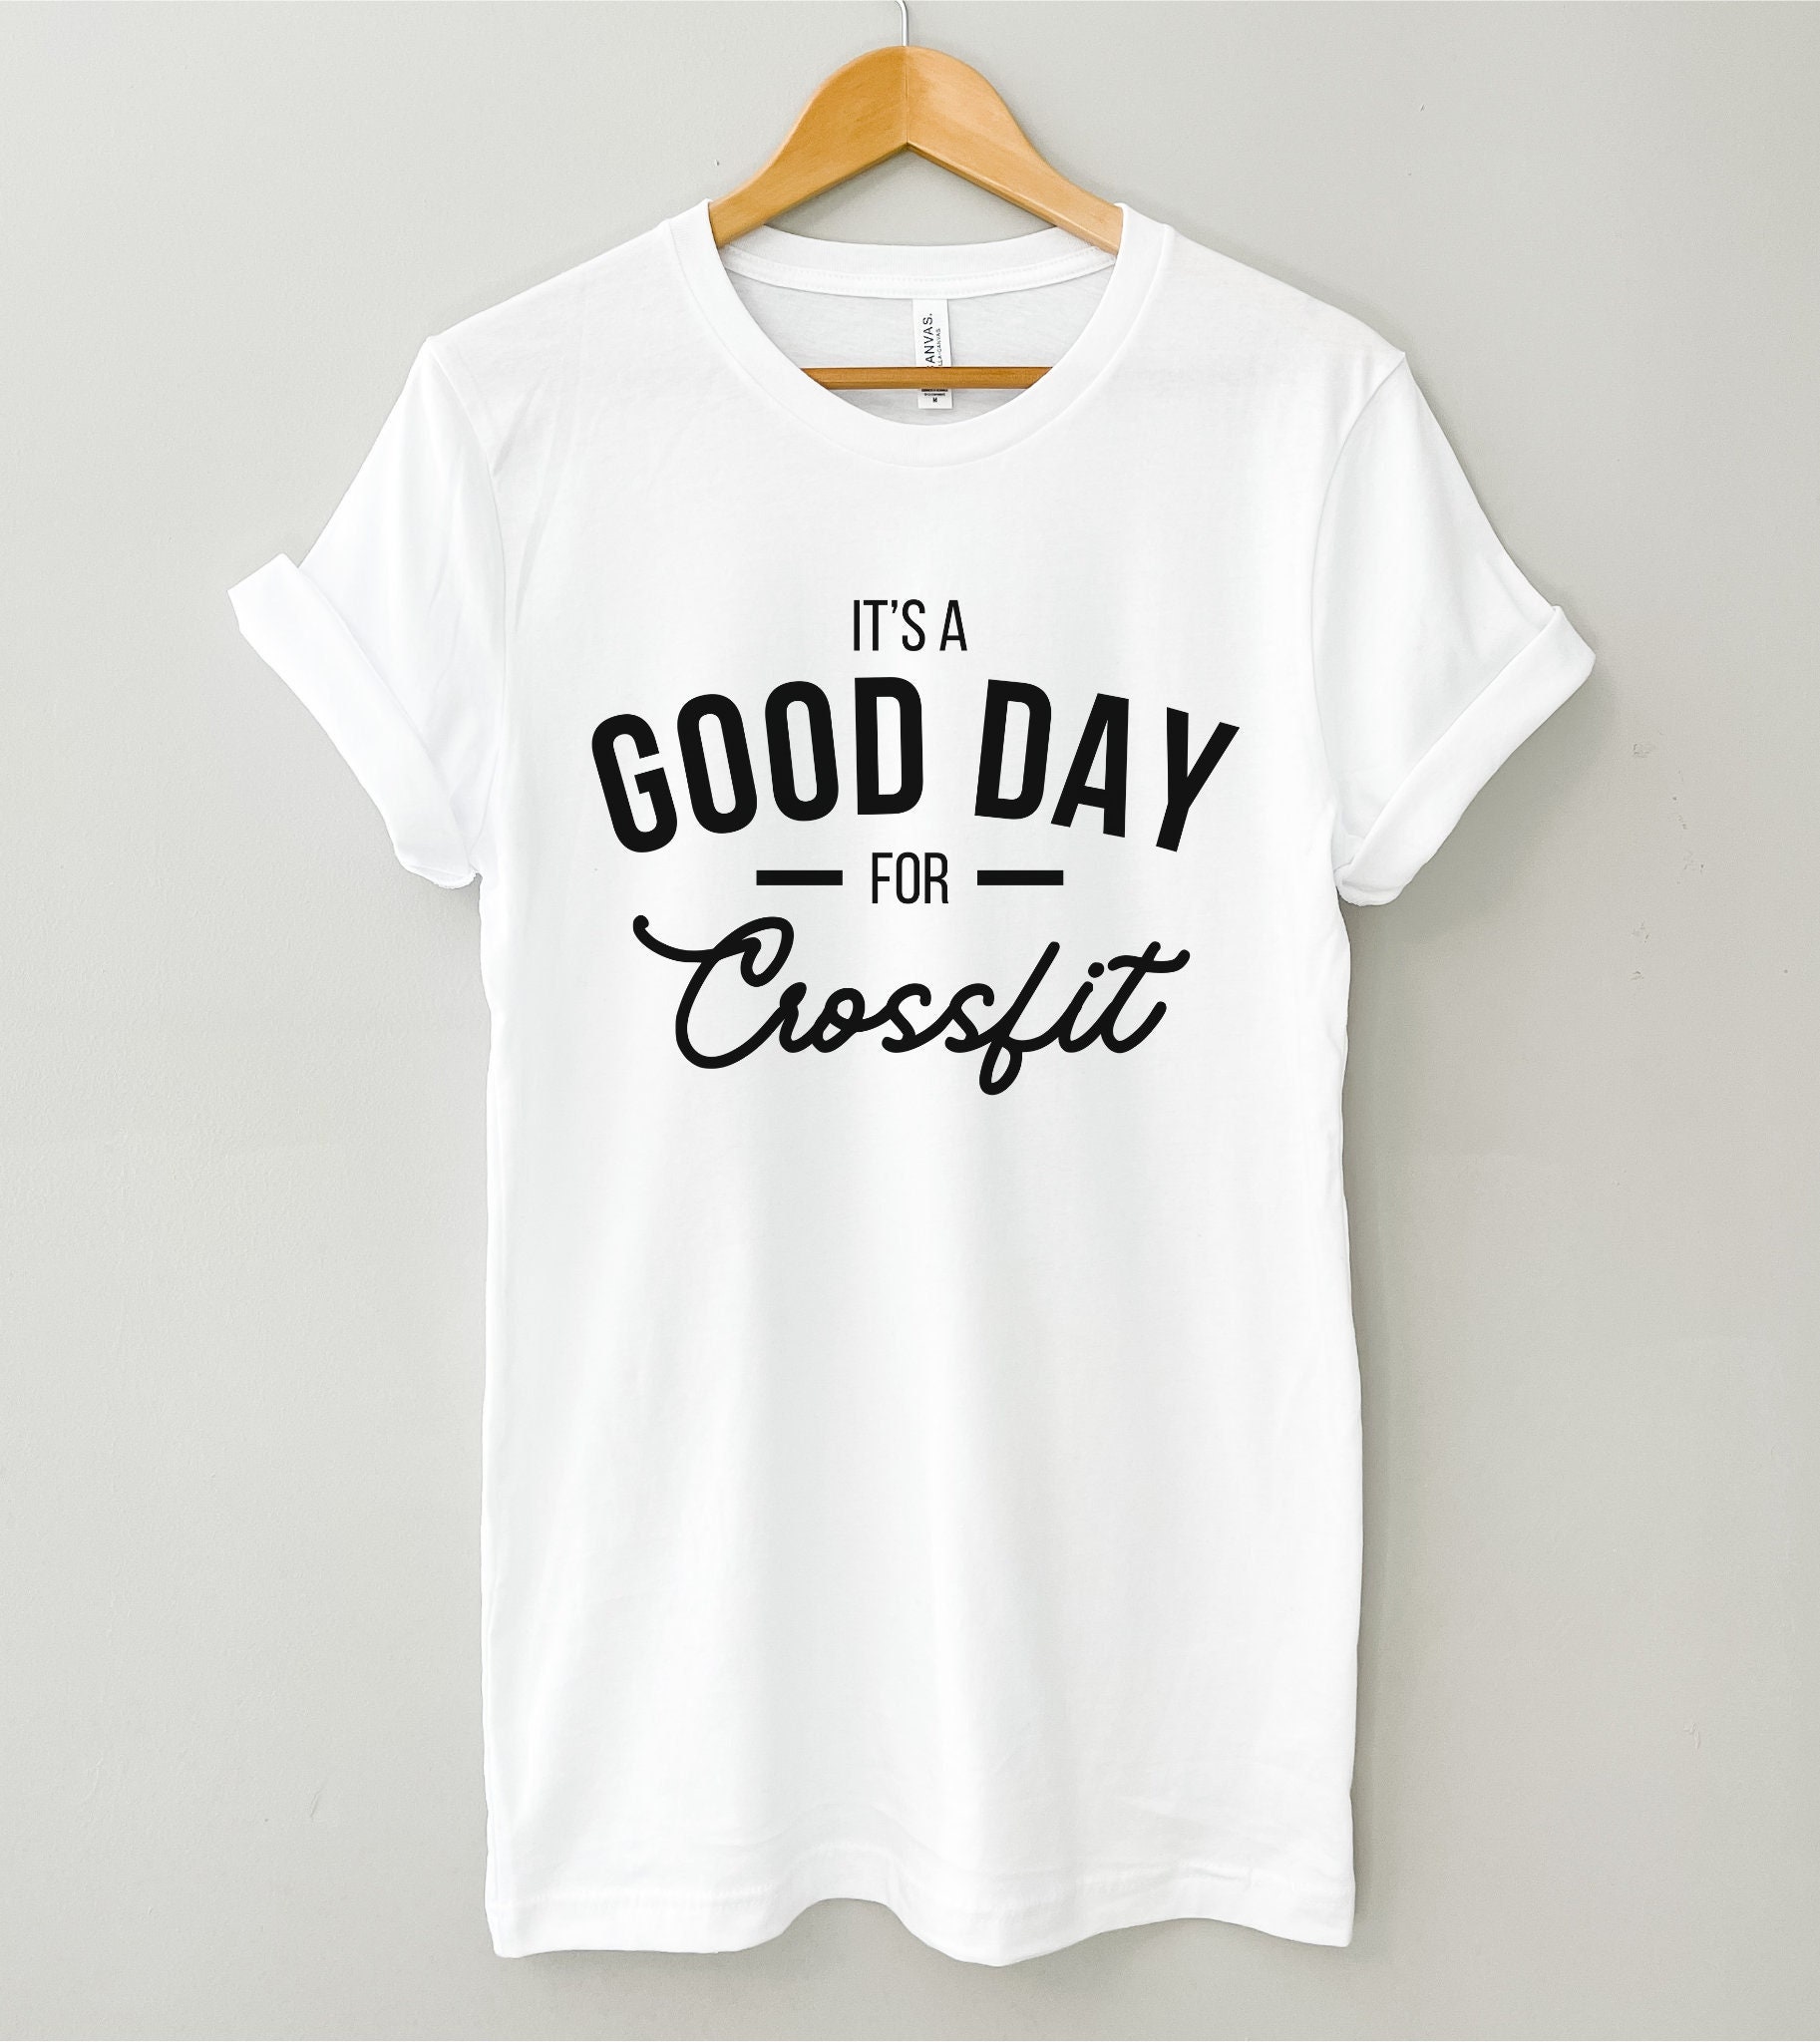 CrossFit t-shirt, Gift for CrossFit lover, Fitness t-shirt, Its a good day  for Crossfit Unisex shirt, Gift for fitness lover, workout shirt